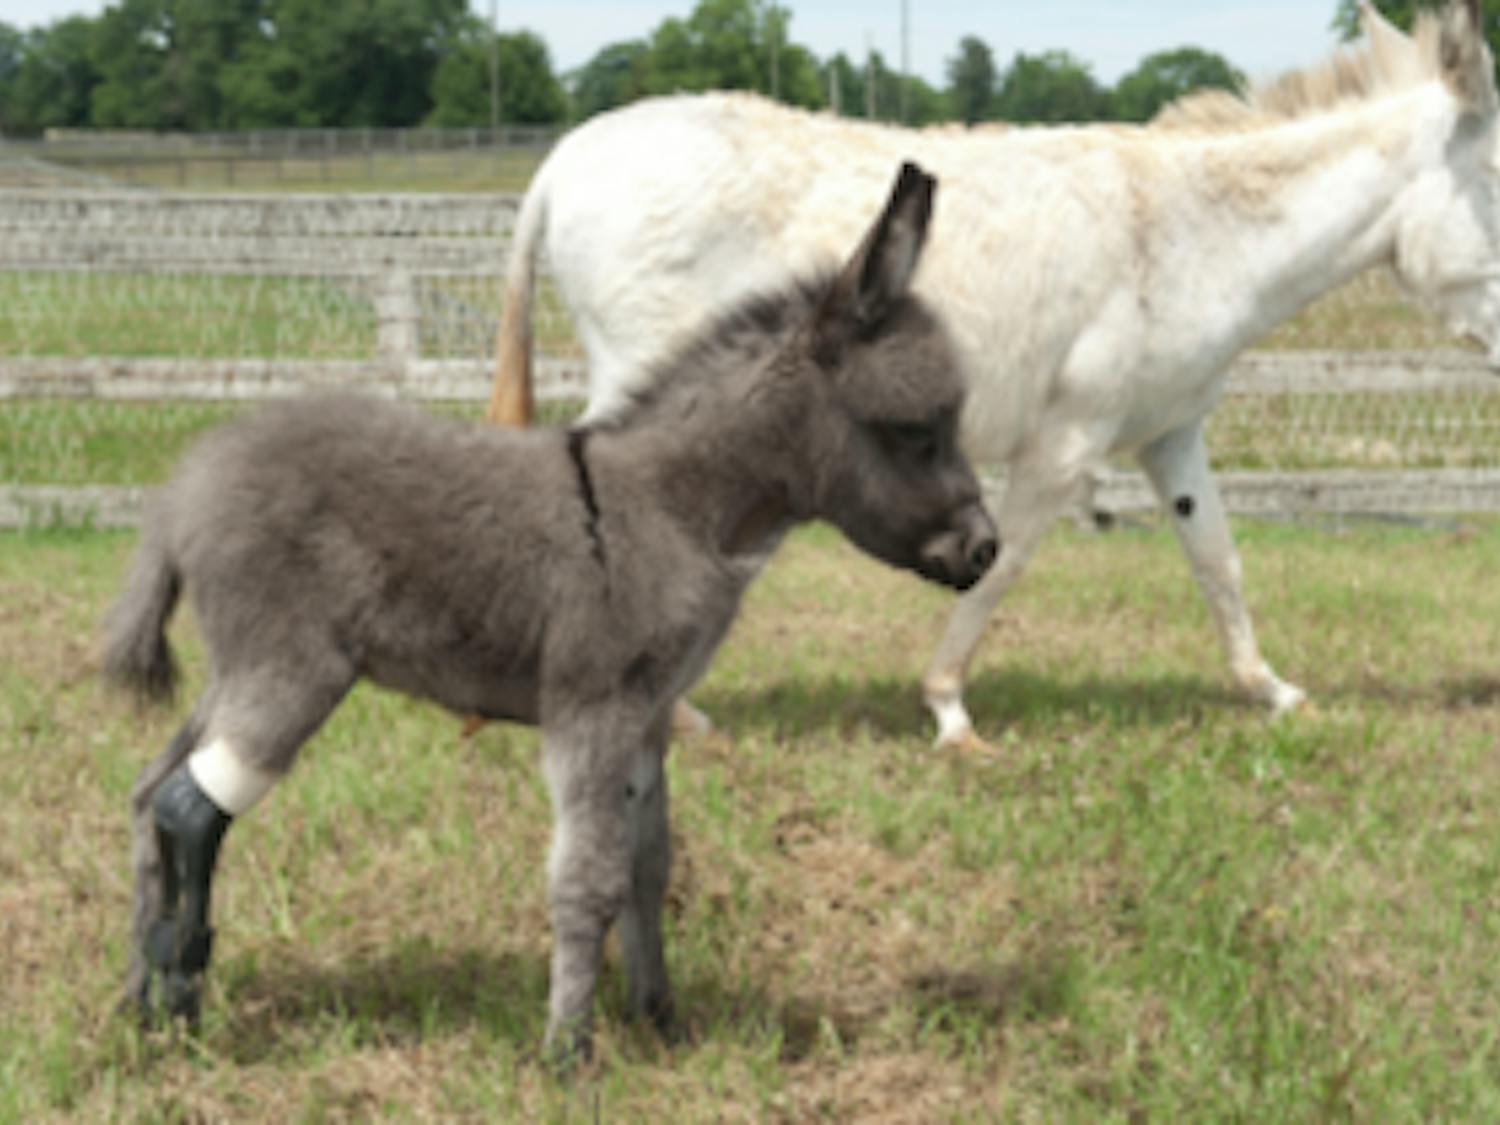 Miniature donkey Emma was fitted with a prosthetic leg by the College of Veterinary Medicine and the Hanger Clinic. Hanger notably made the prosthetic tail for Winter, the dolphin in the film "Dolphin Tail." (Courtesy of The War Eagle Reader)